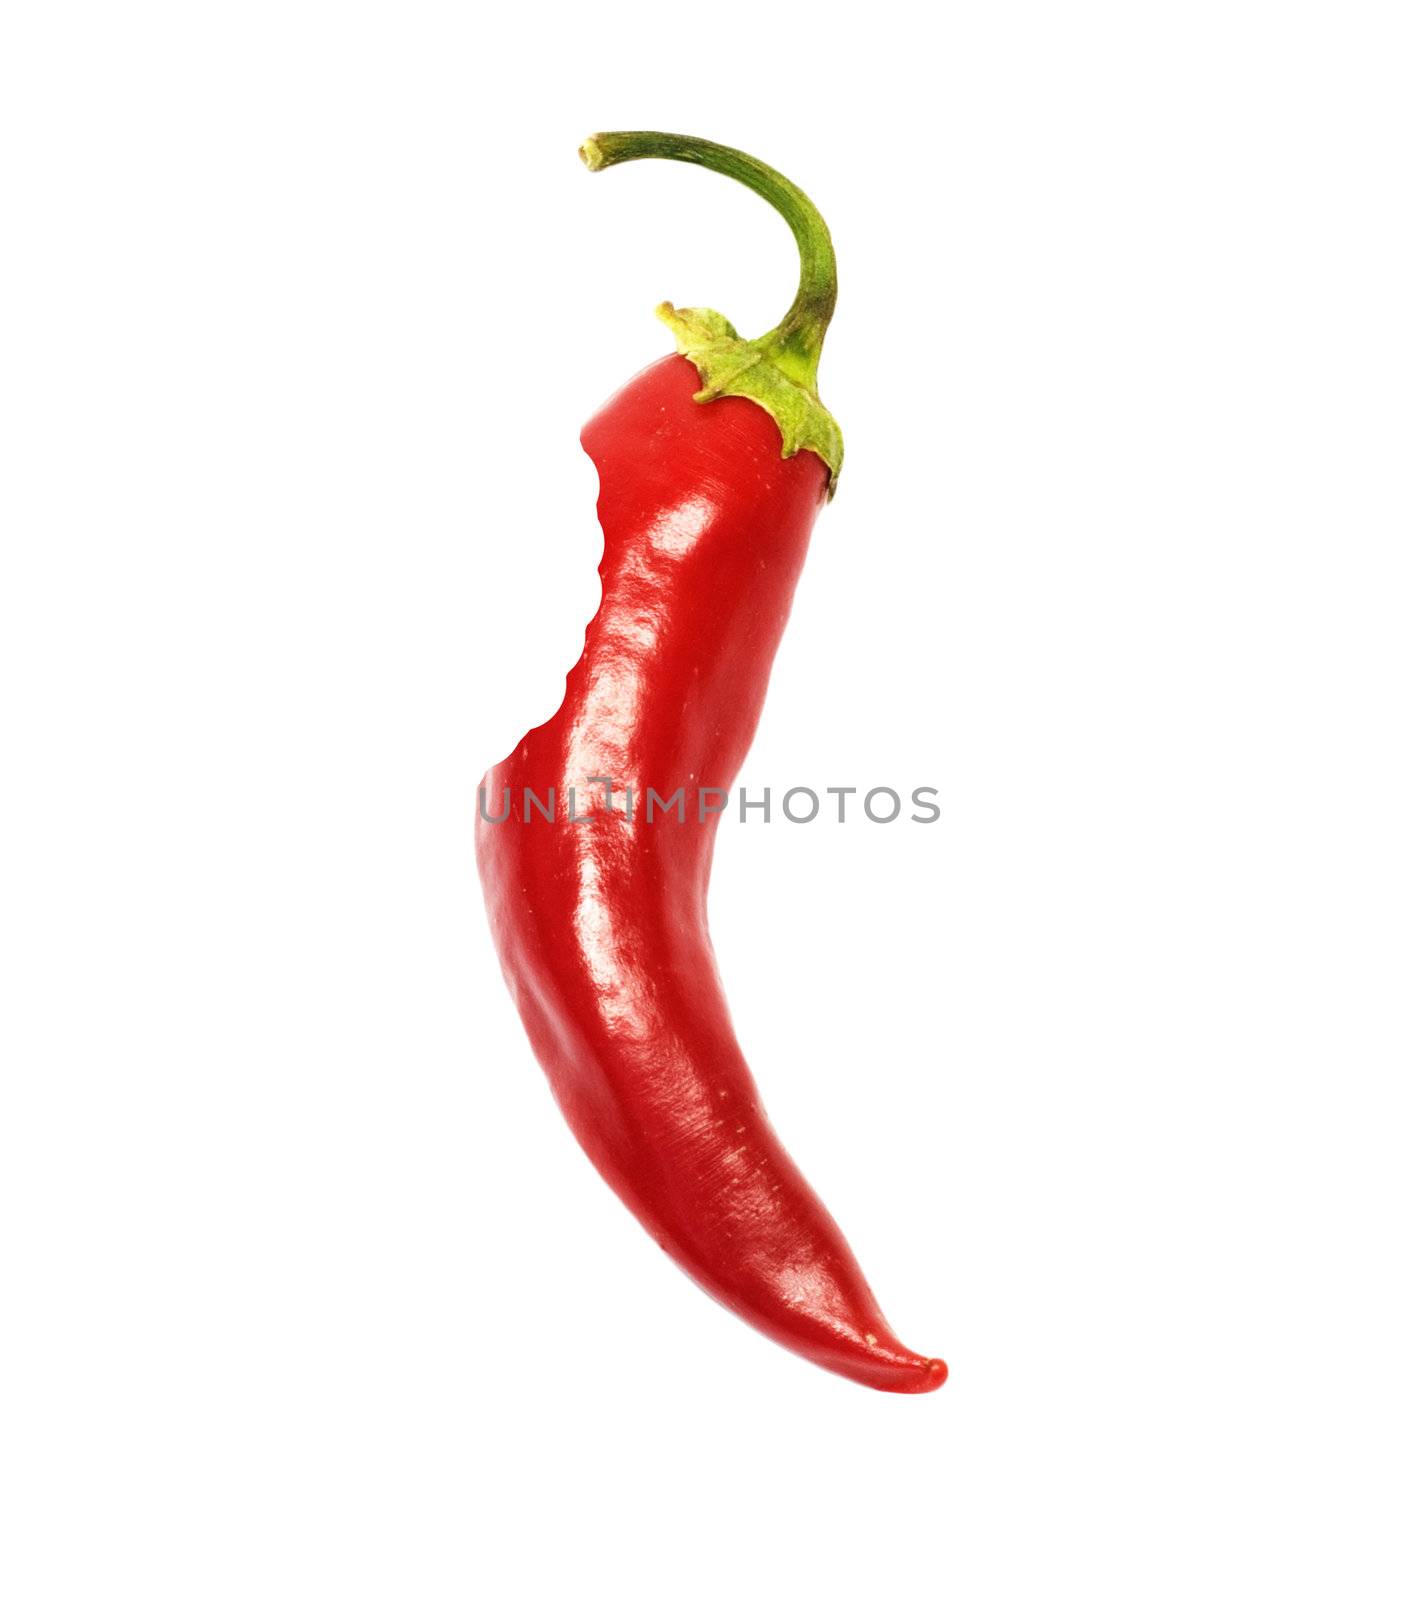 bited off a piece of red hot chili pepper  by schankz